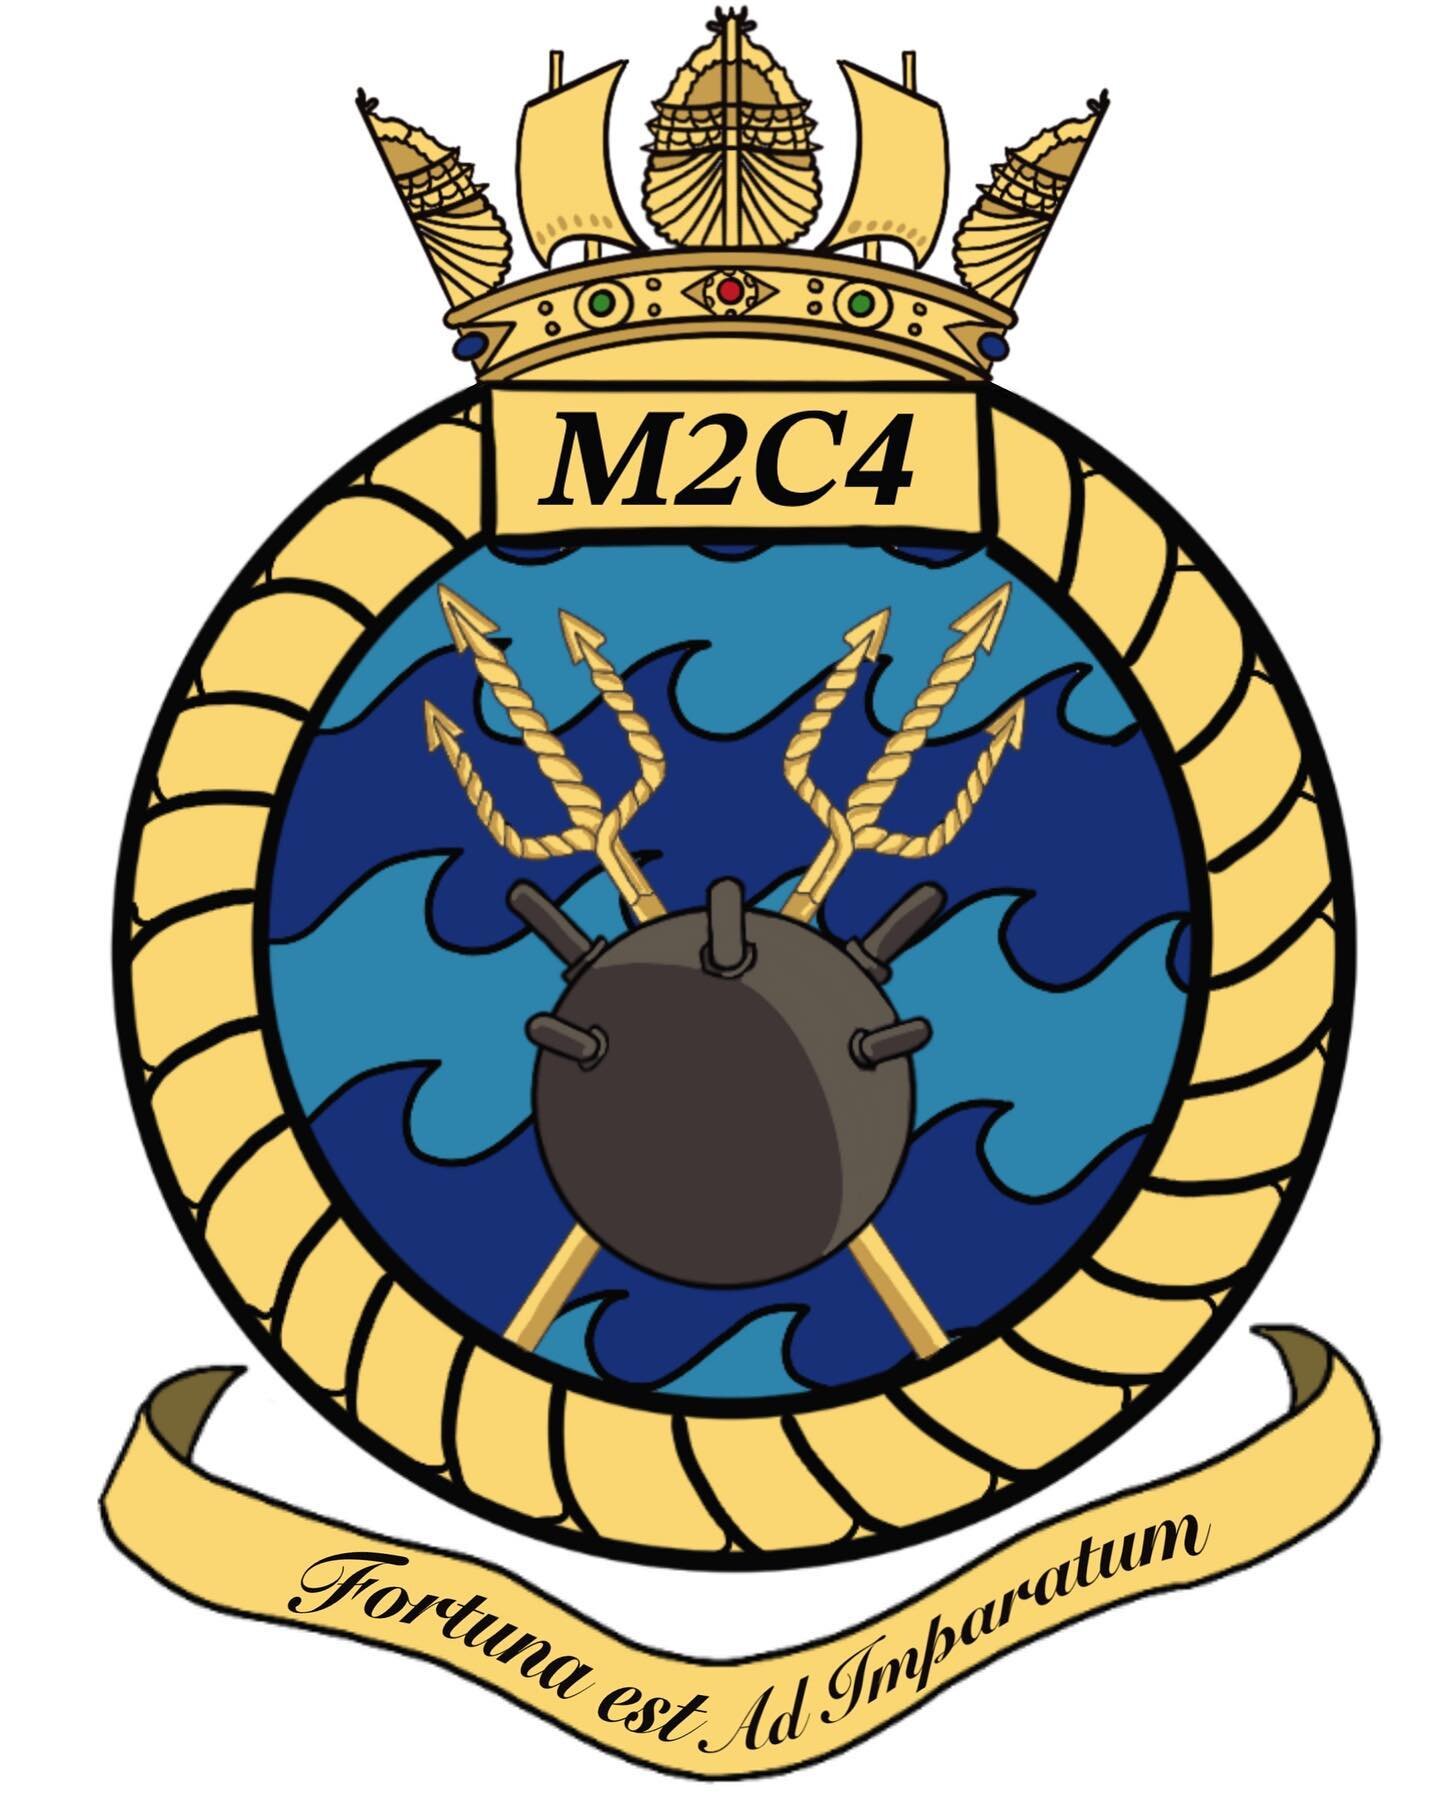 A little while ago I was asked to design two challenge coin designs for the Royal Navy&rsquo;s Crew 4 from 2nd Mine Counter-measures Squadron.

The crew, stationed in the Gulf, rotate every few months with their counterparts in Portsmouth. One milita